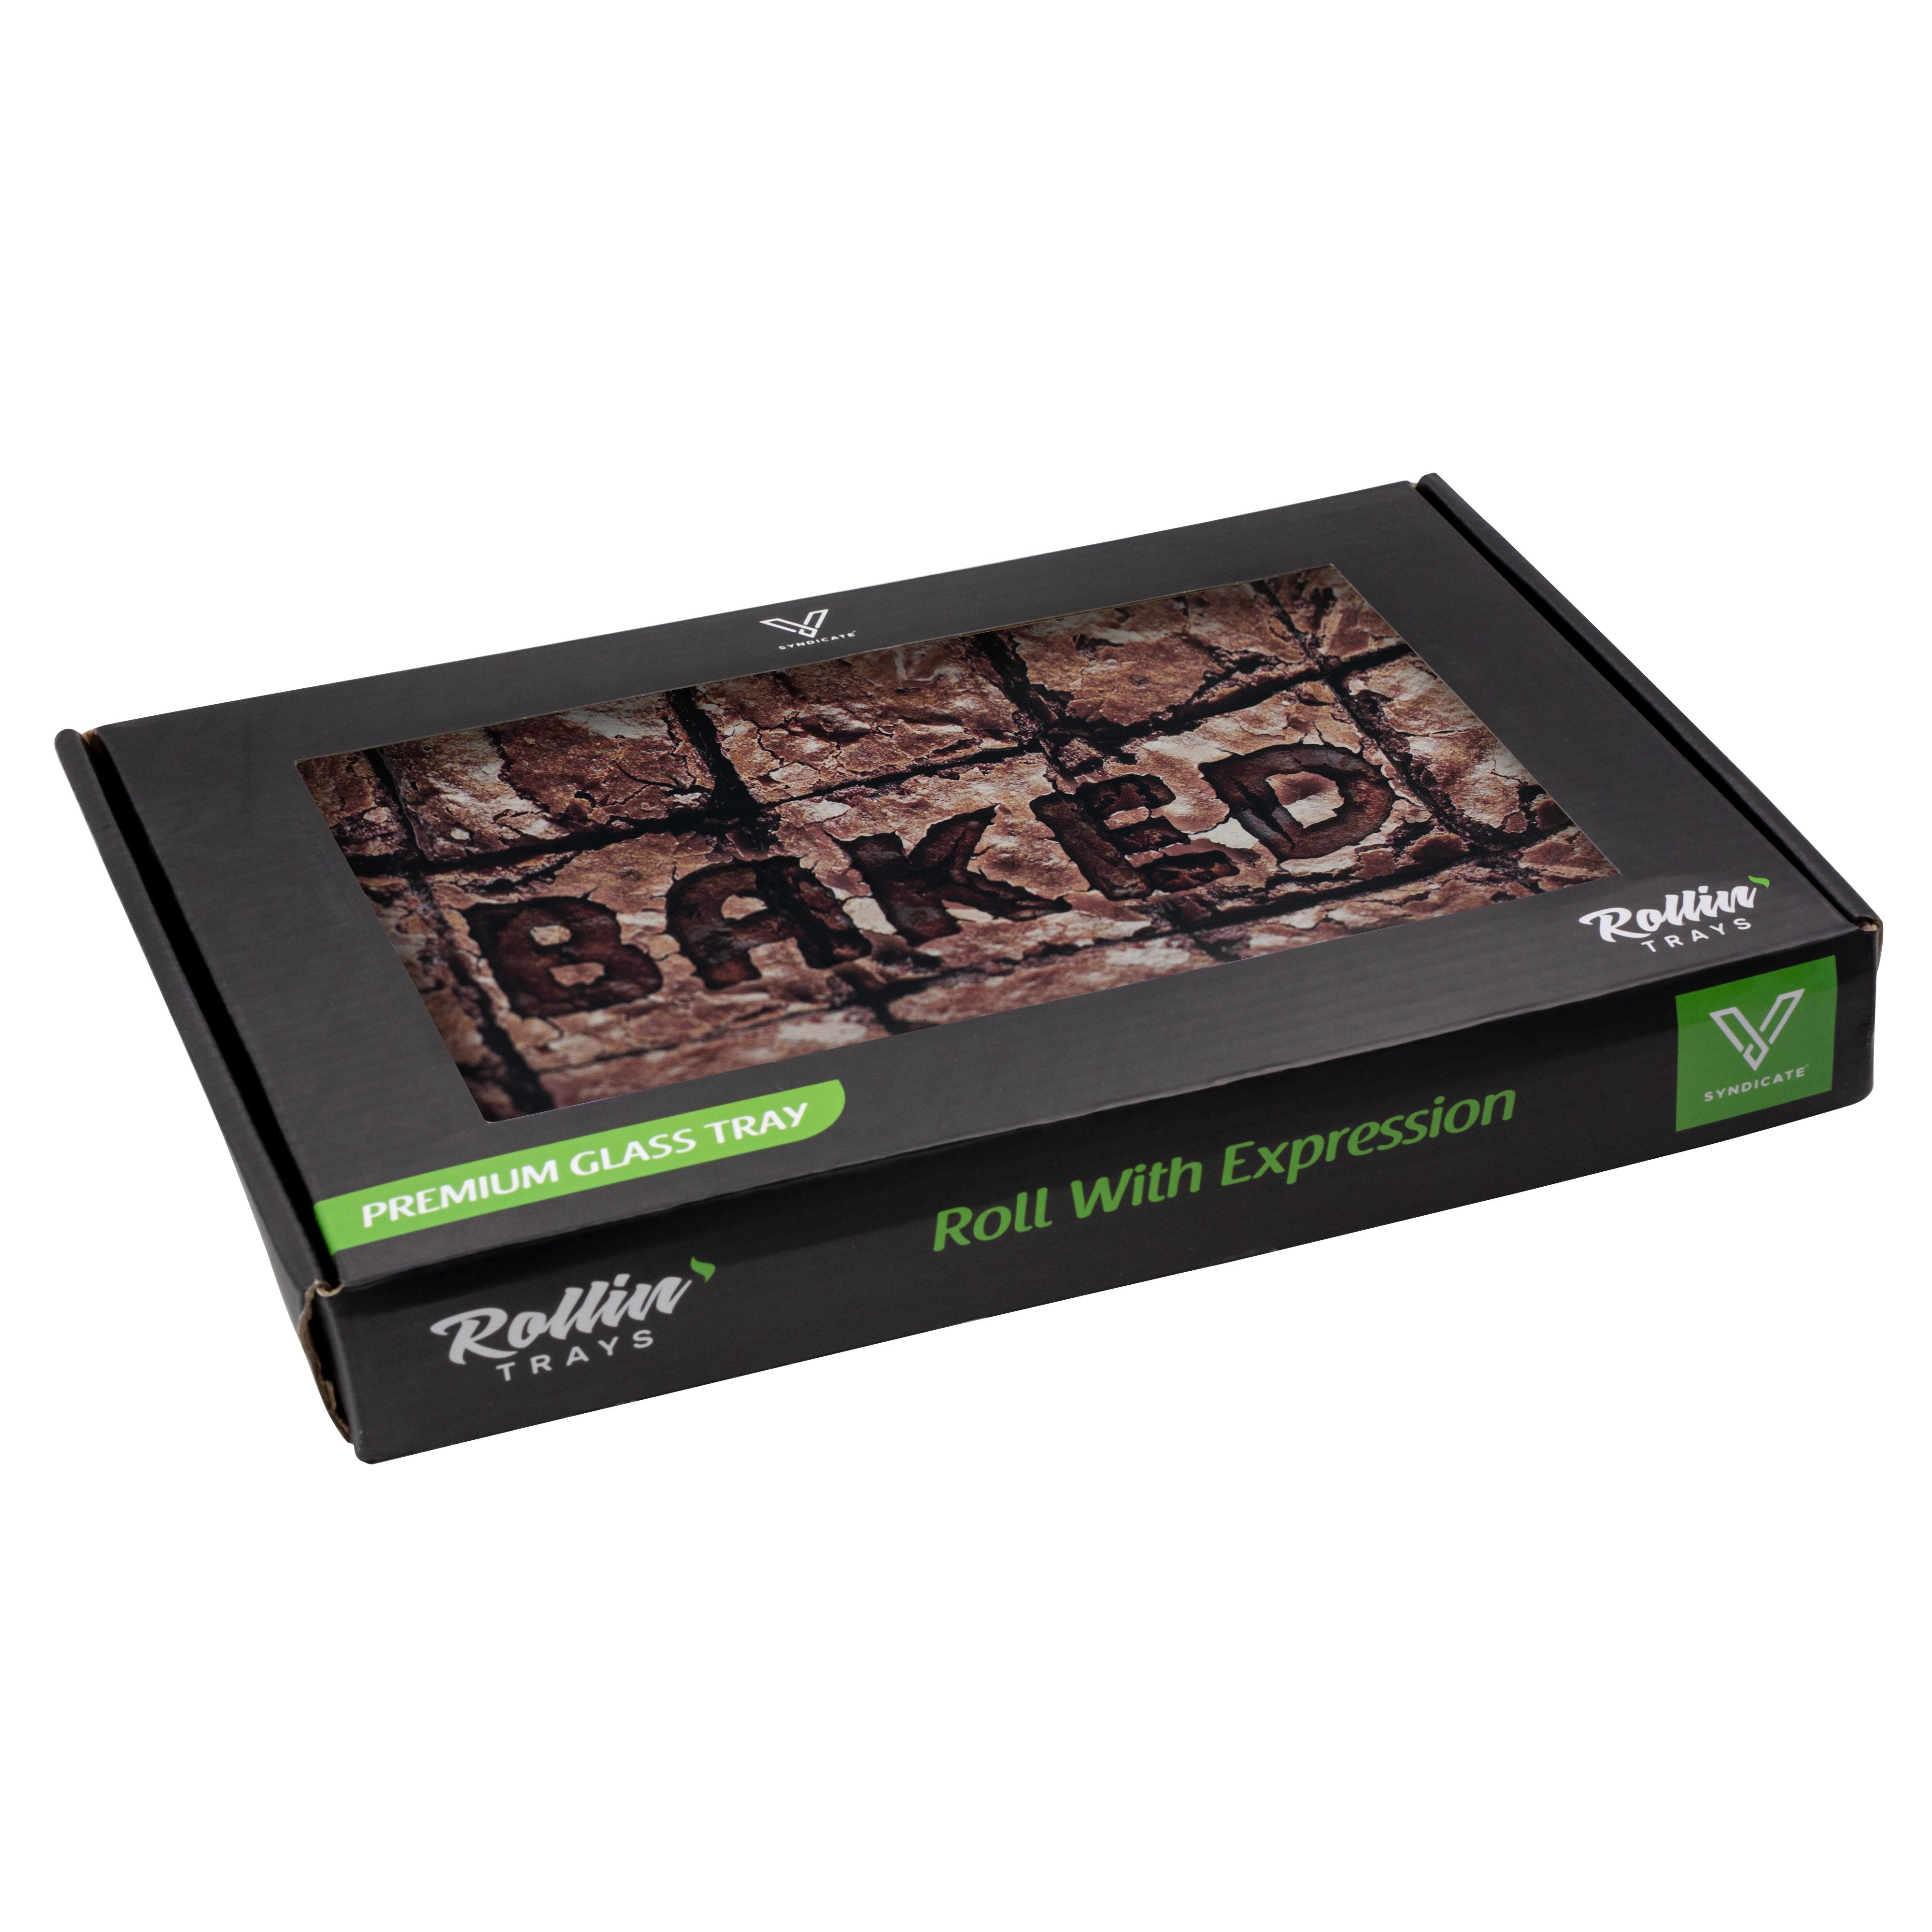 V-SYNDICATE | Baked Brownies Rolling Tray | 6.5in x 5in - Medium - Glass - 2